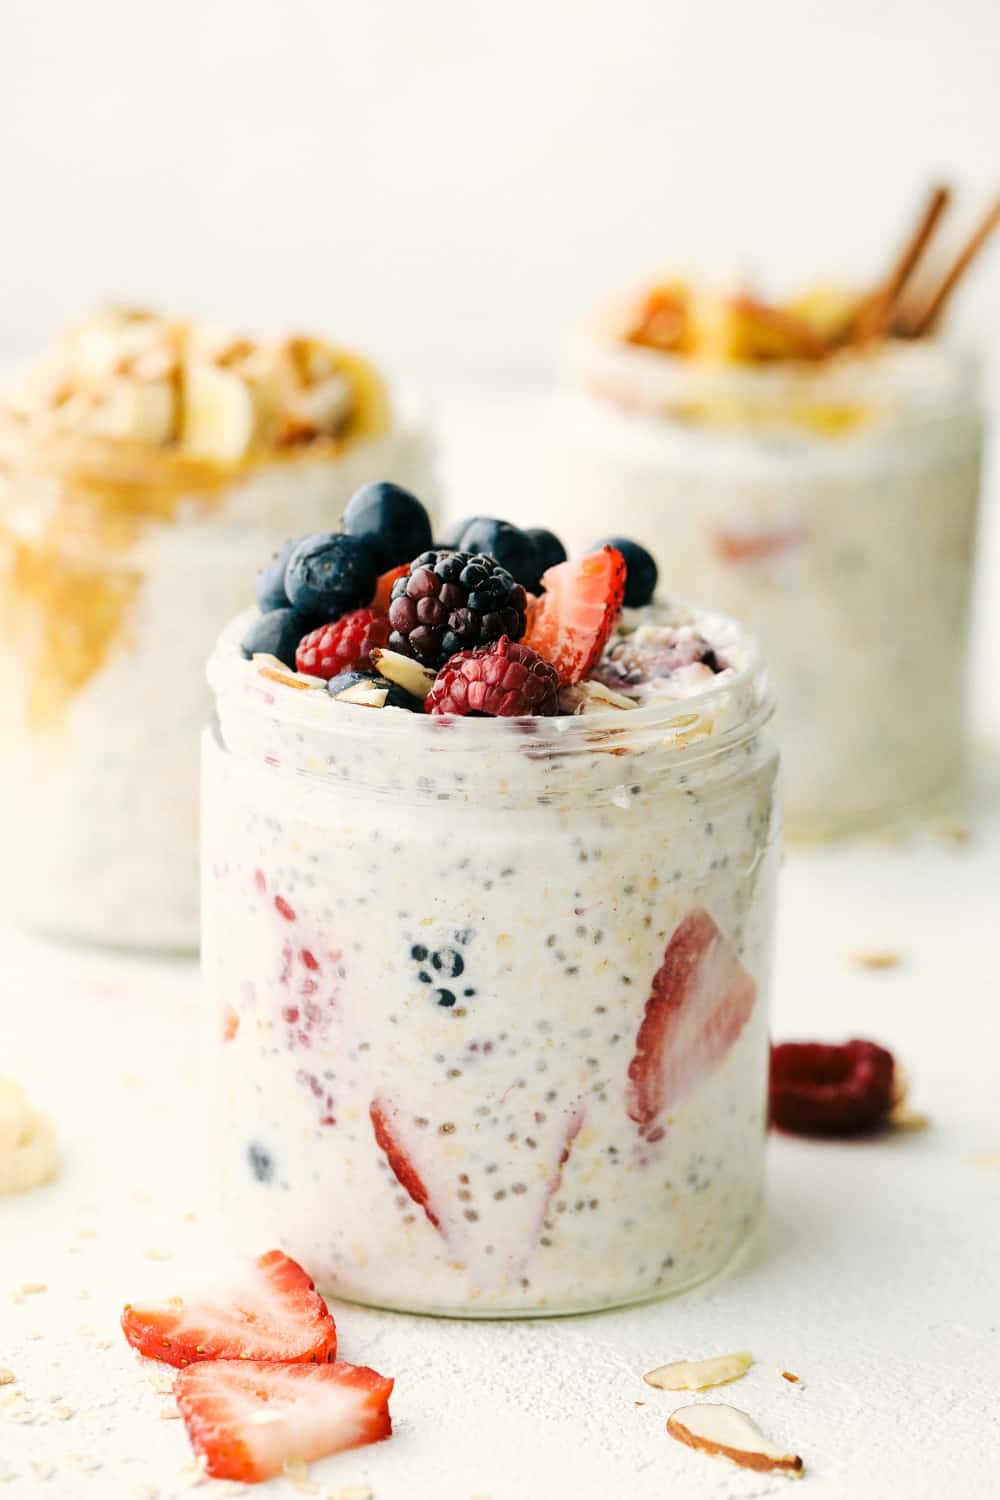 Over night oats in a jar with mixed berries on top.